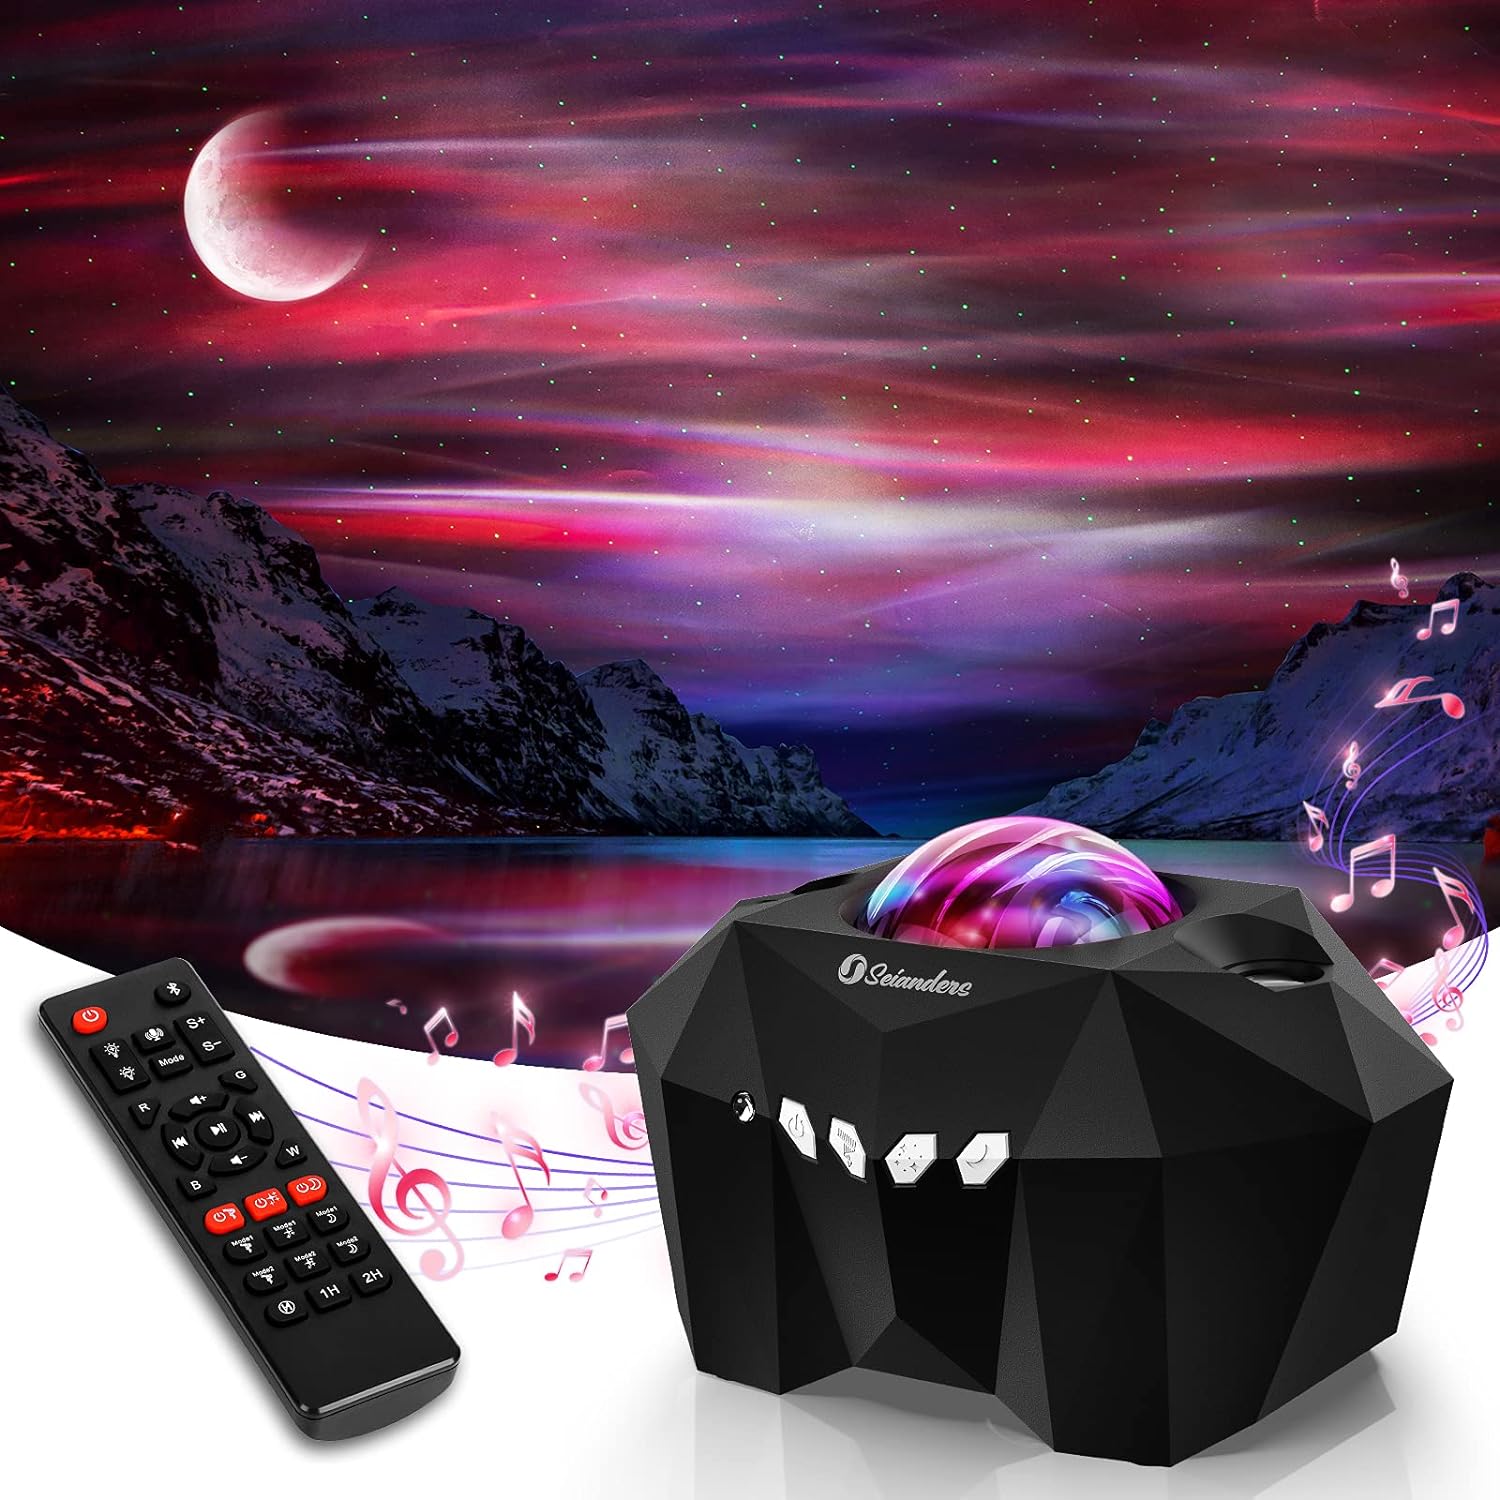 Aurora Lights Star Projector, Seianders Galaxy Projector with Remote Control, Sky Night Light Projector for Kids Adults, Bluetooth Music Speaker, Room Decor for Bedroom/Ceiling/Party/Home